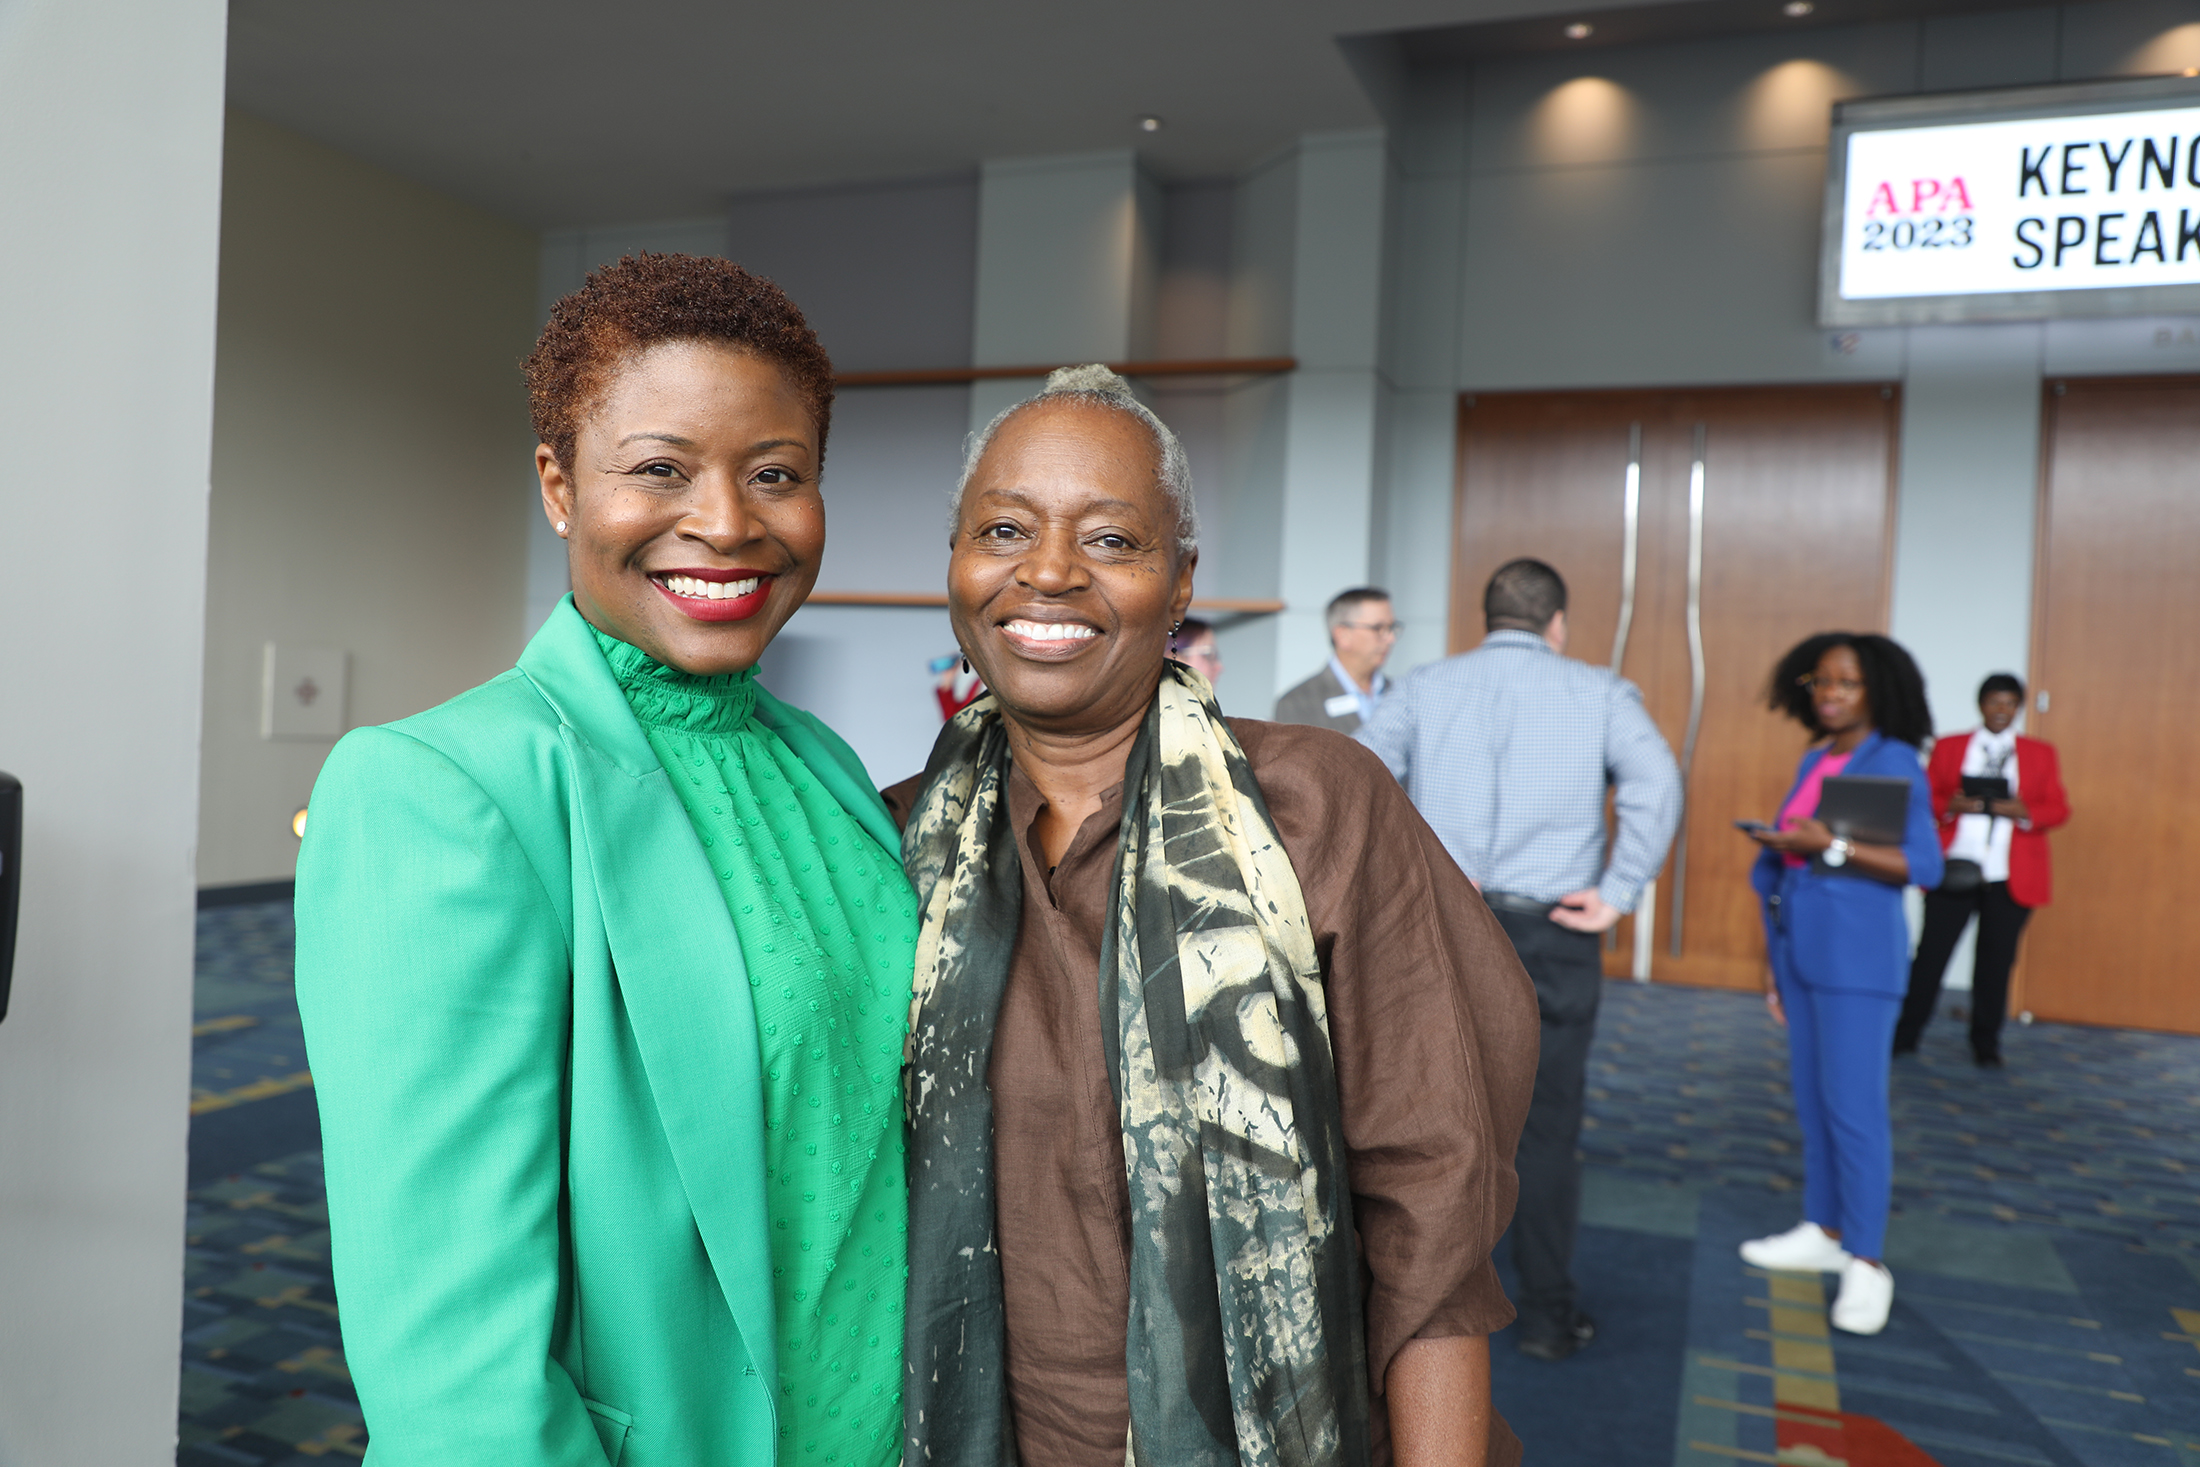 Provost Dr. Wendi S. Williams poses with her mother after the keynote event